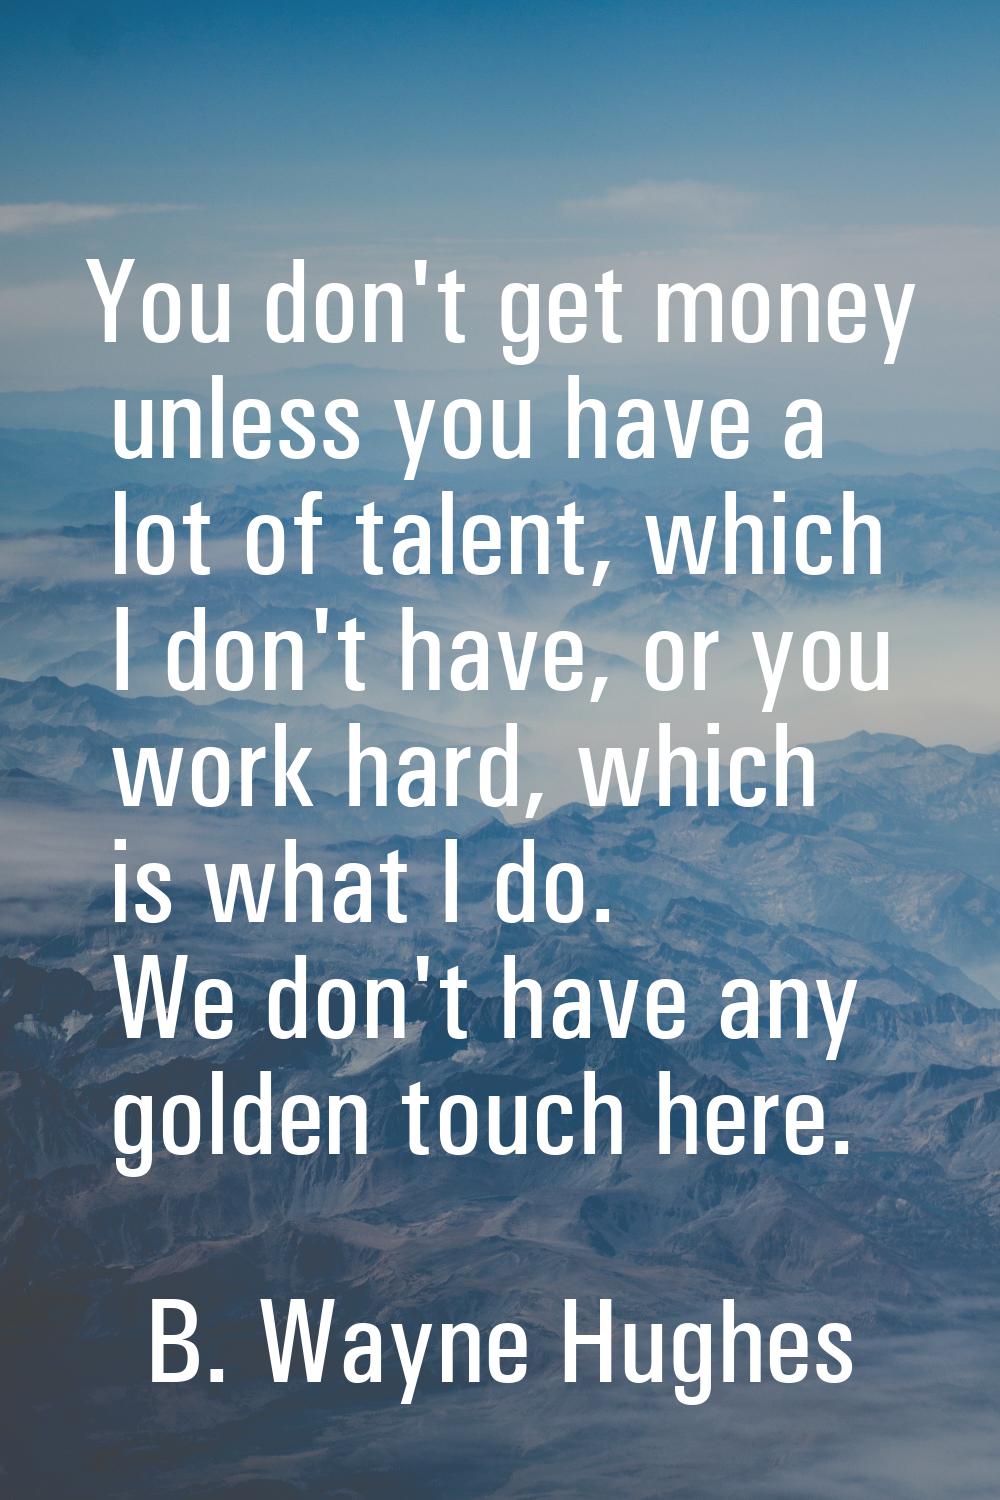 You don't get money unless you have a lot of talent, which I don't have, or you work hard, which is